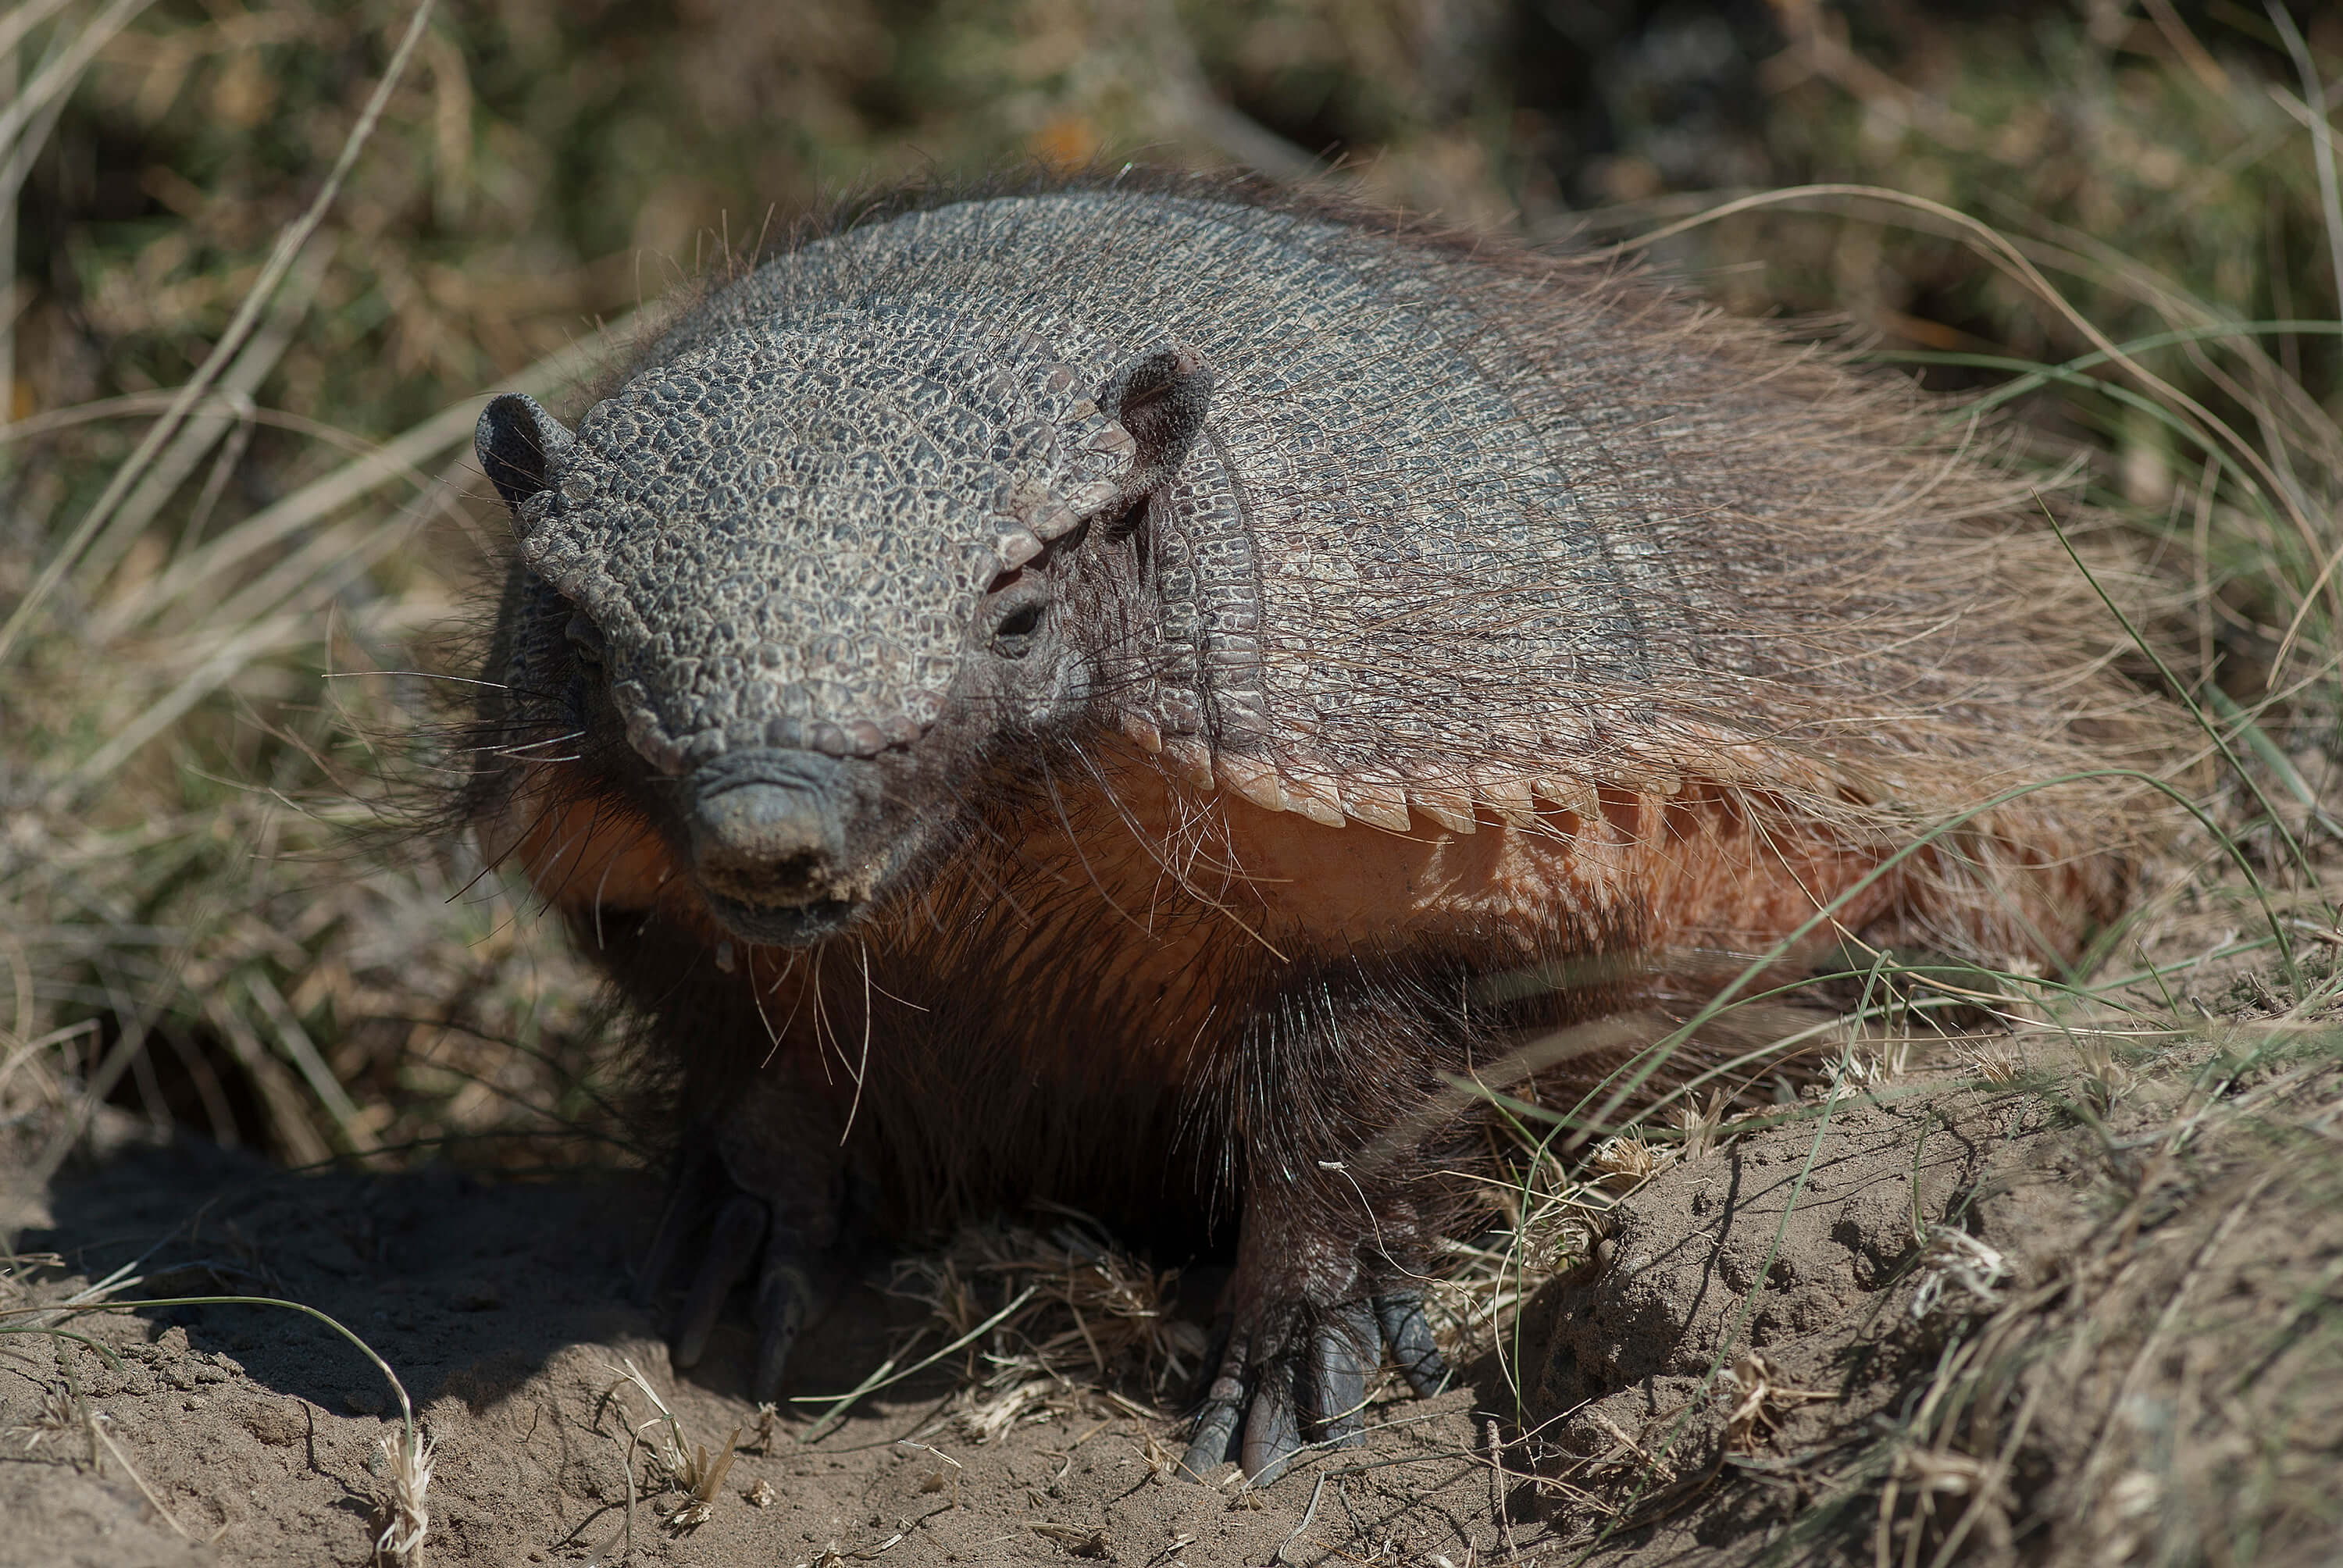 A giant armadillo in the dirt and long grass